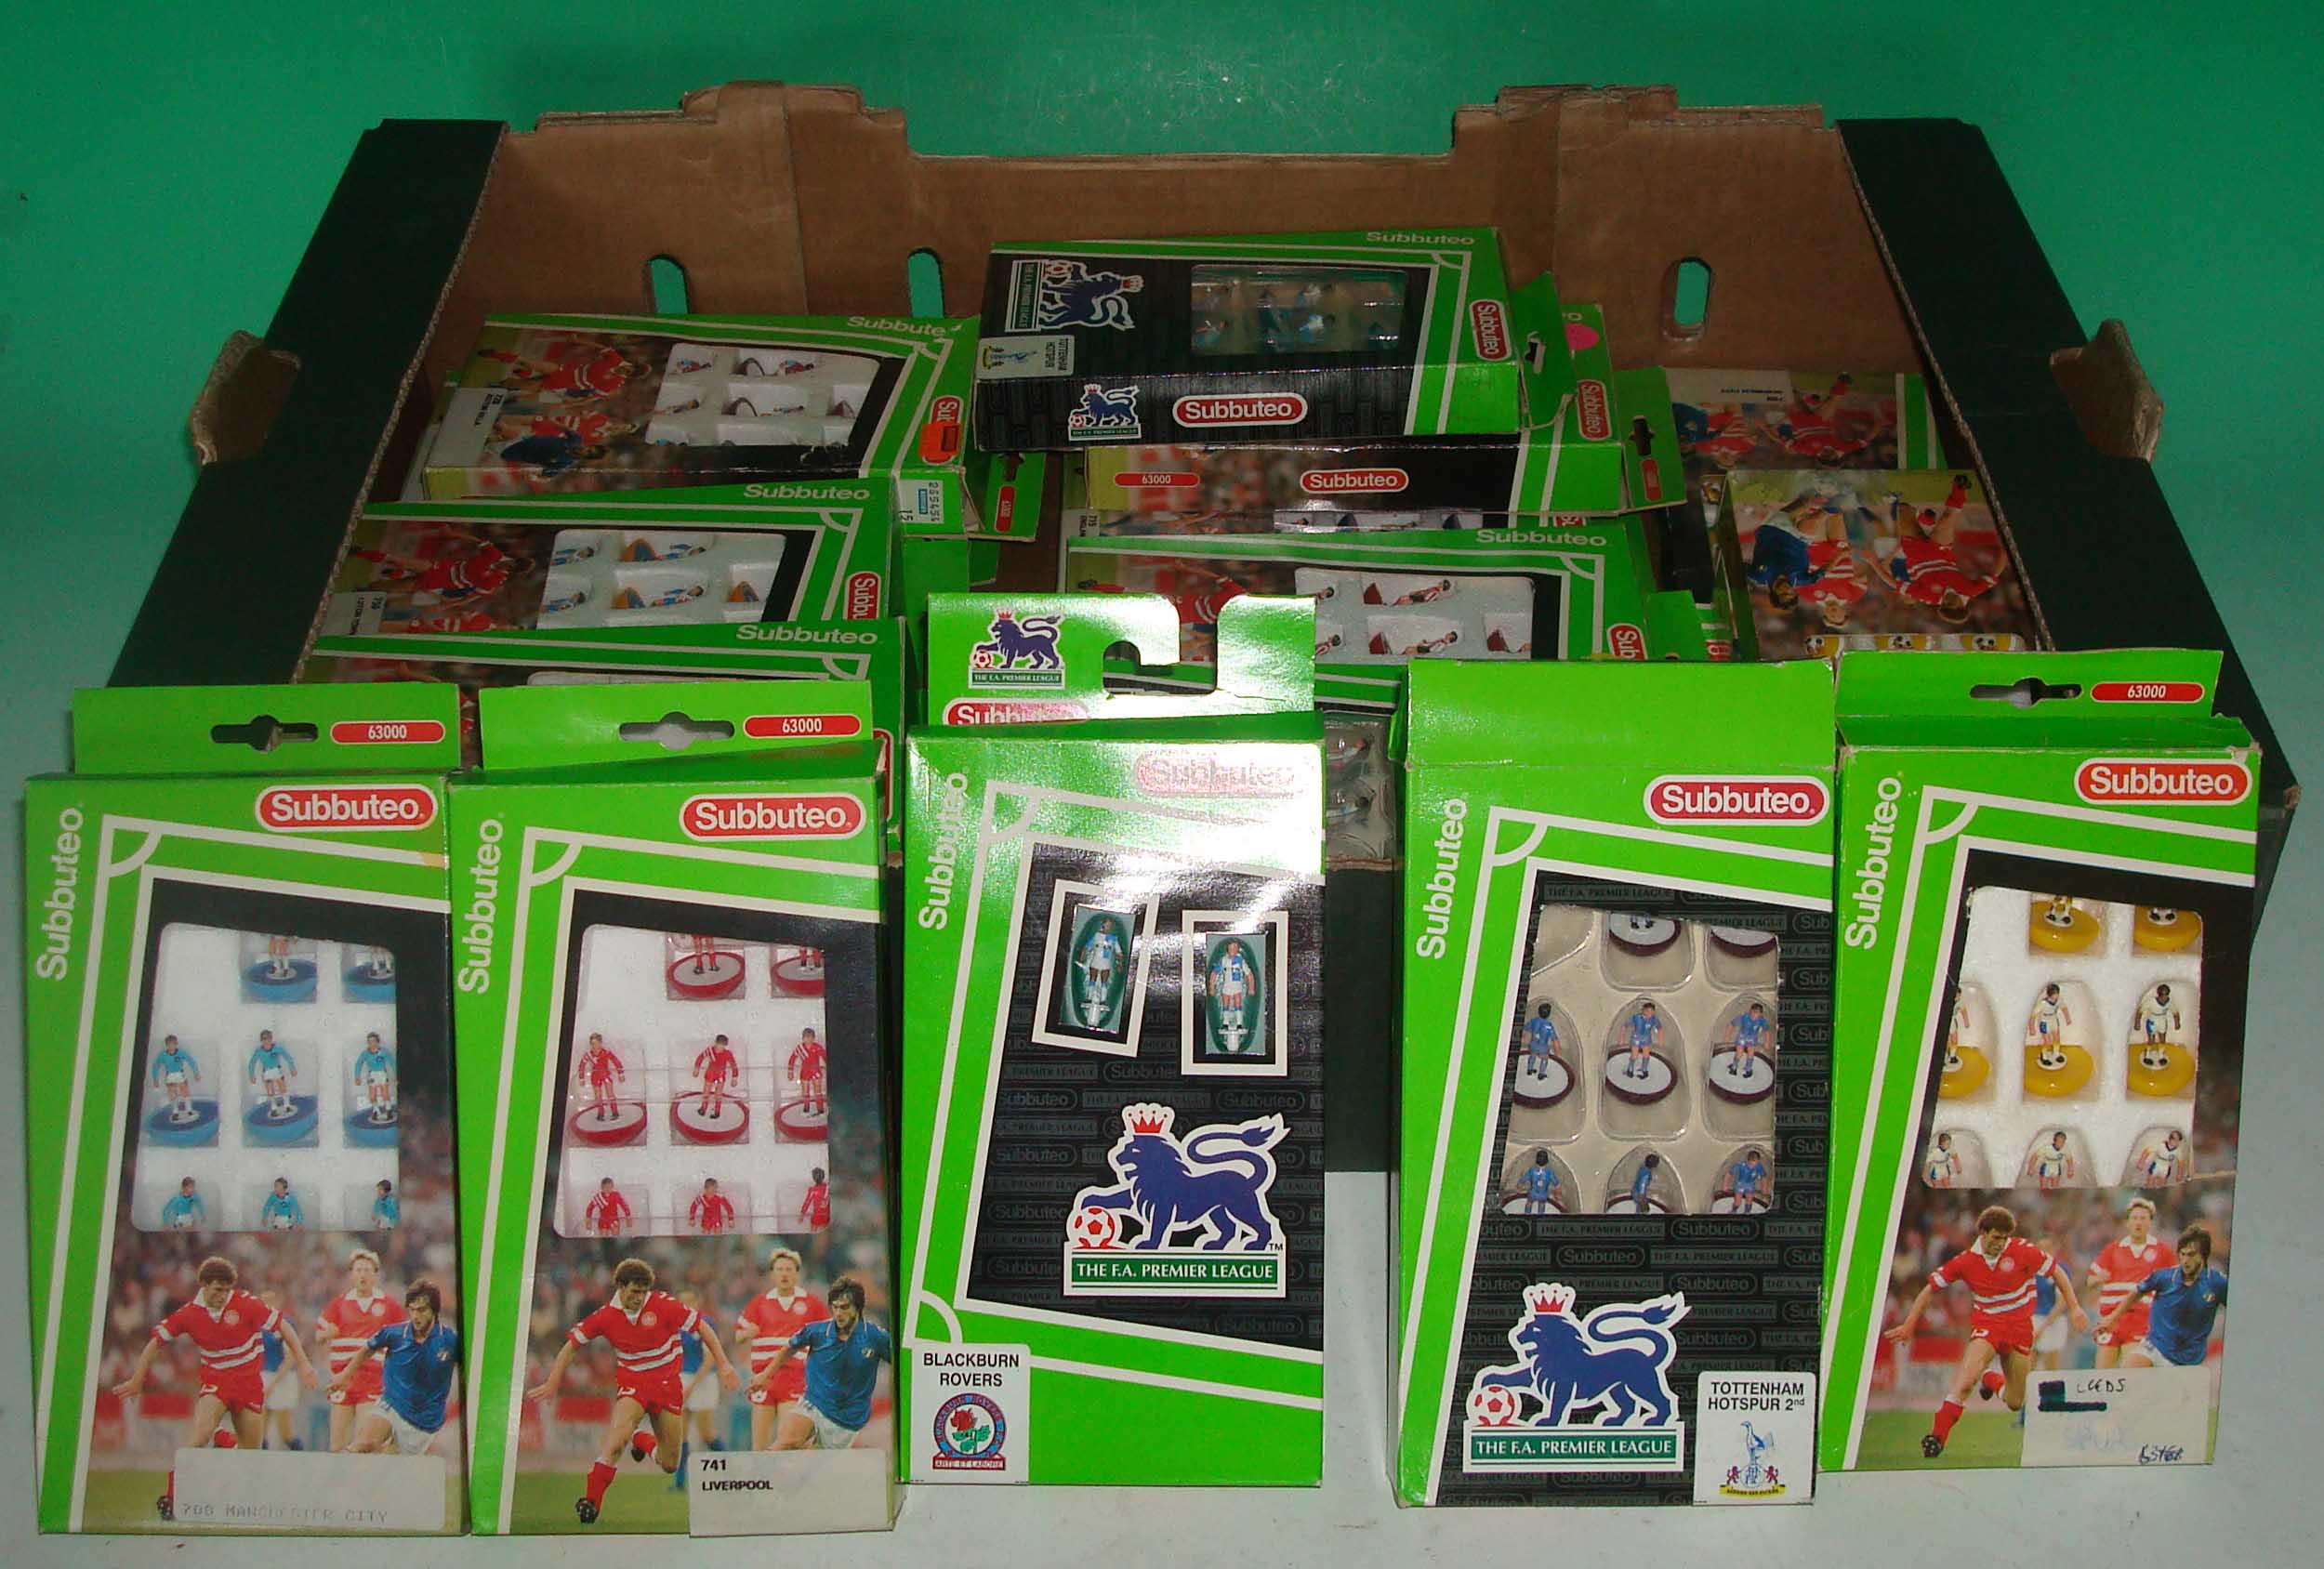 Subbuteo Lightweight Teams Boxed: To consist of Numbers 698 Everton, 777 Nottingham Forest, 813